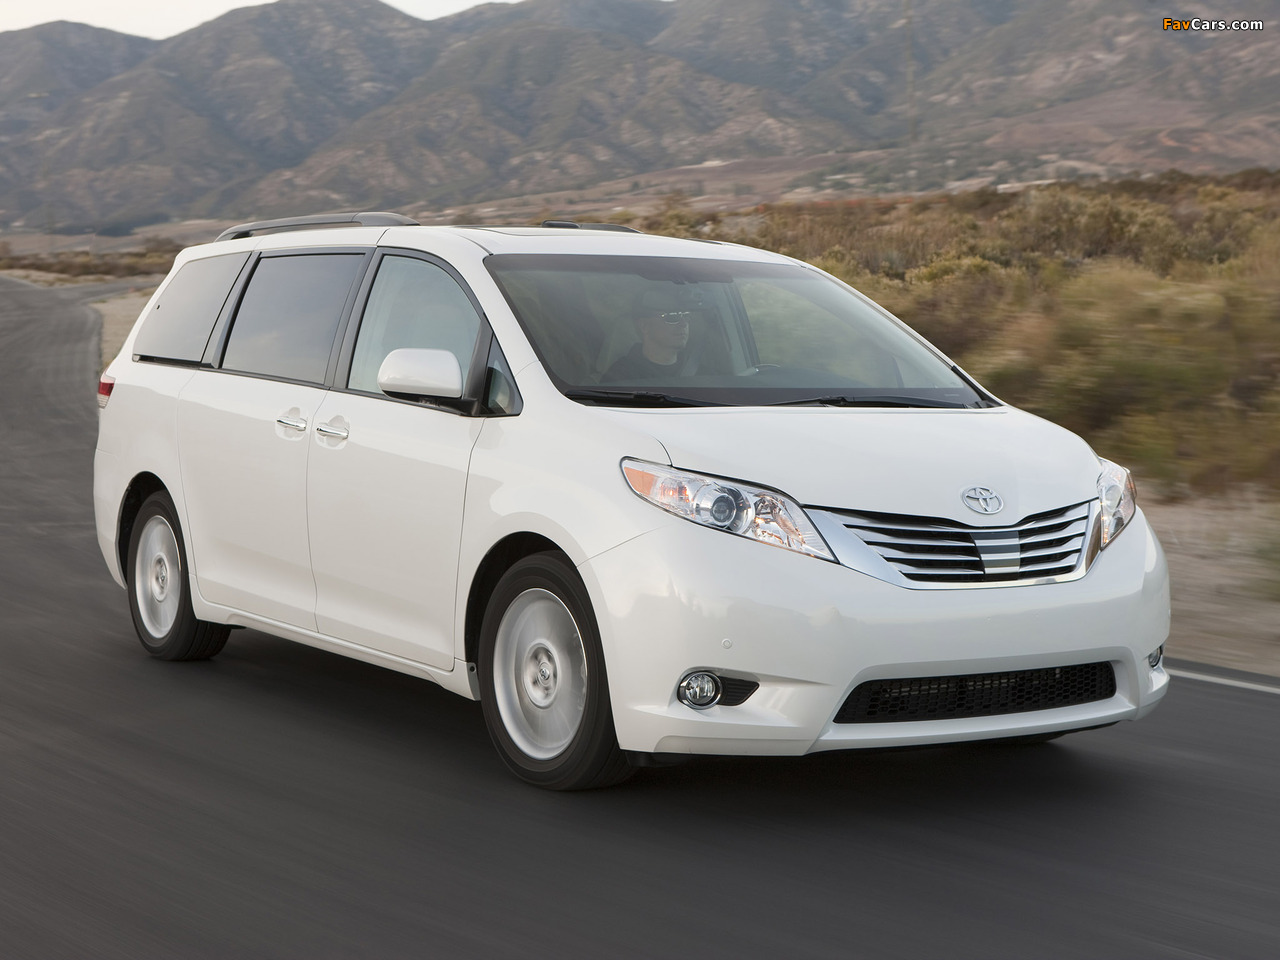 Toyota Sienna 2010 images (1280 x 960)